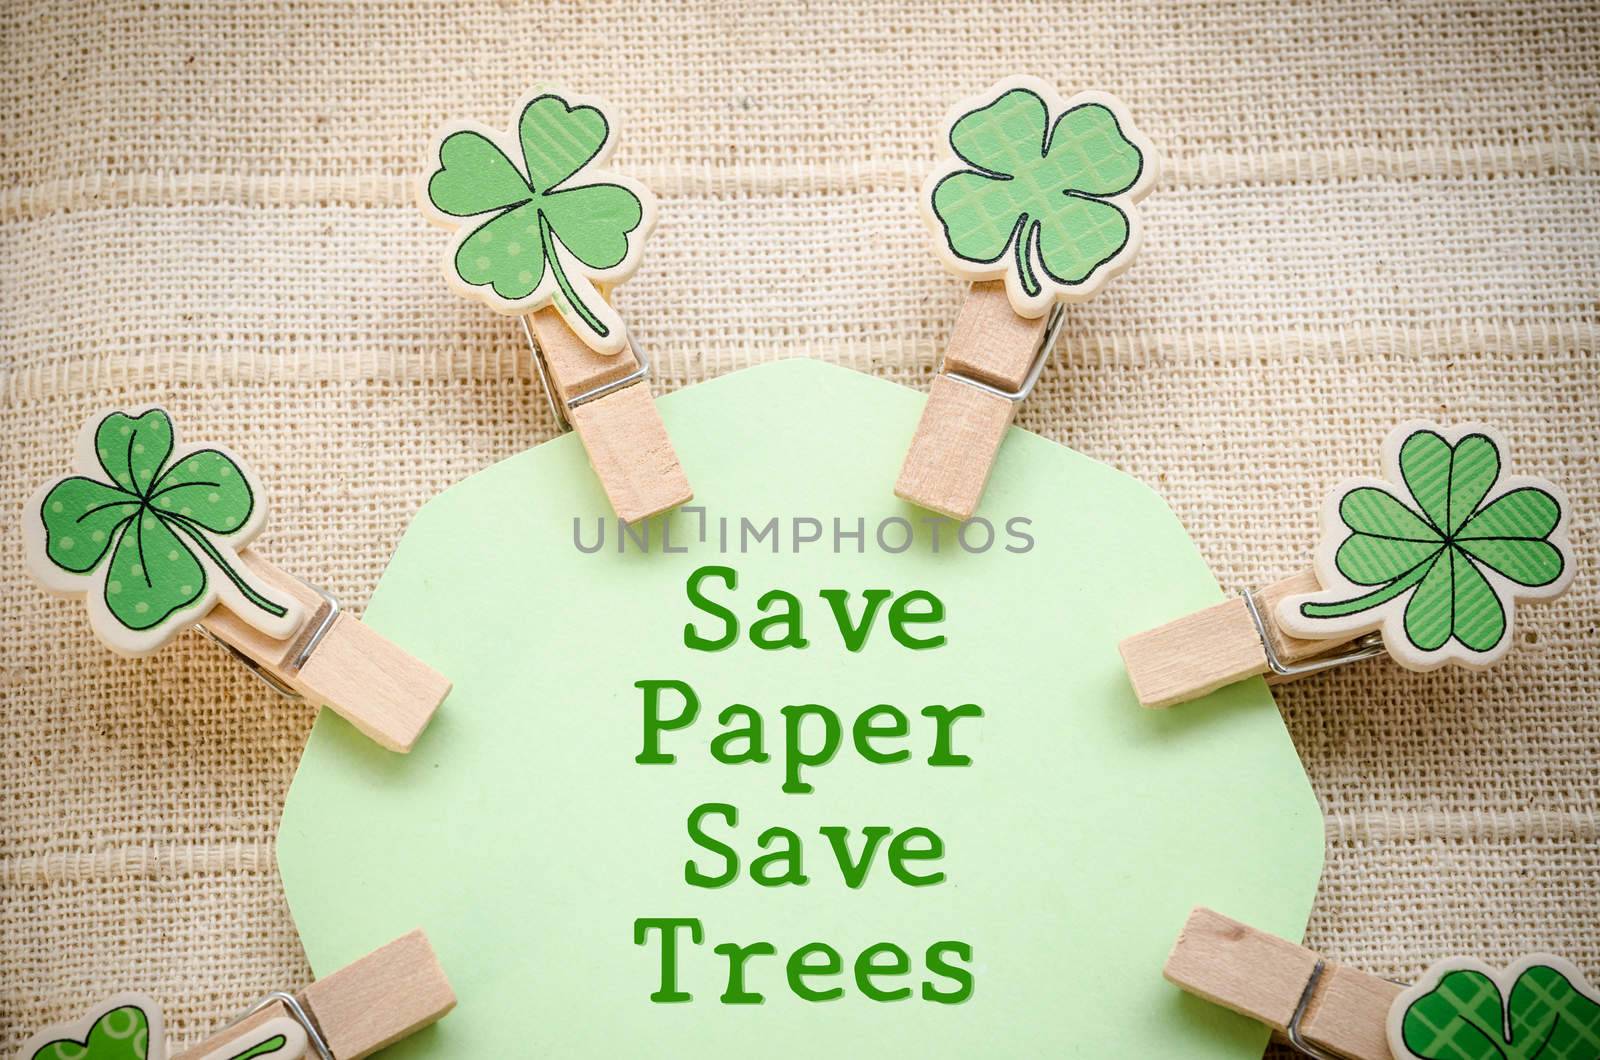 Save paper save trees on green paper and leaf wooden clamps on fabric background. Save world save life concept.